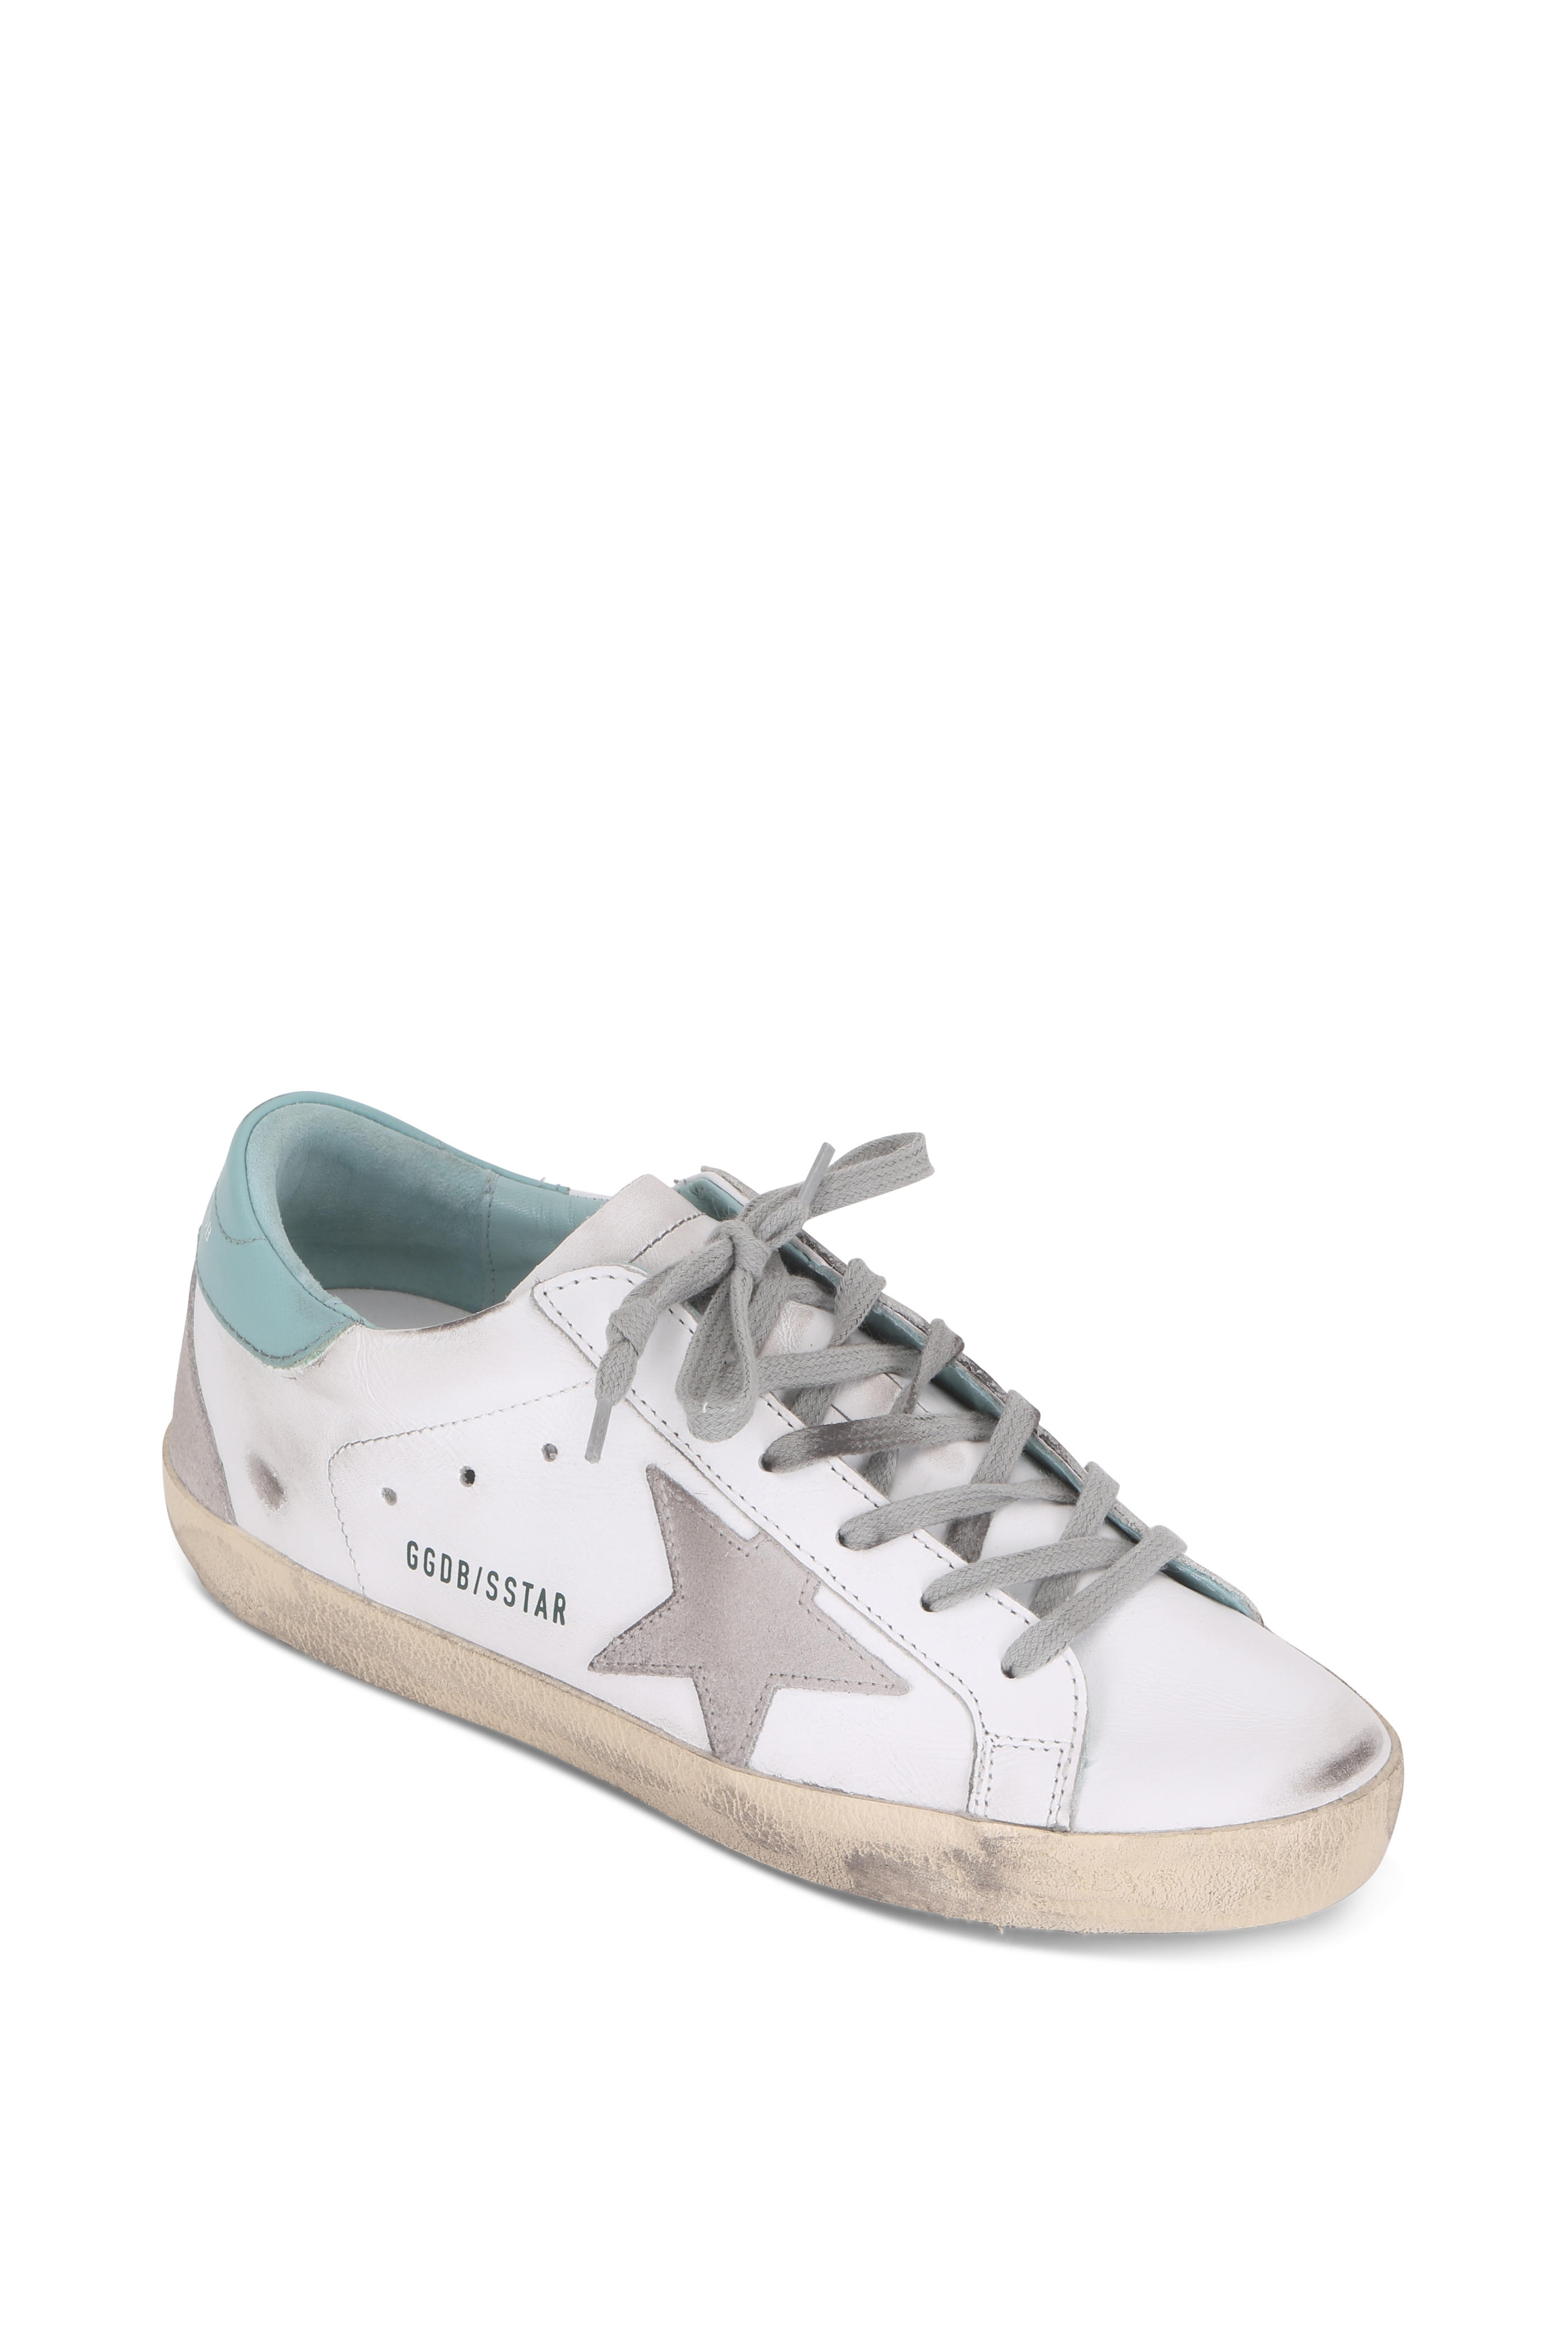 golden goose white and grey